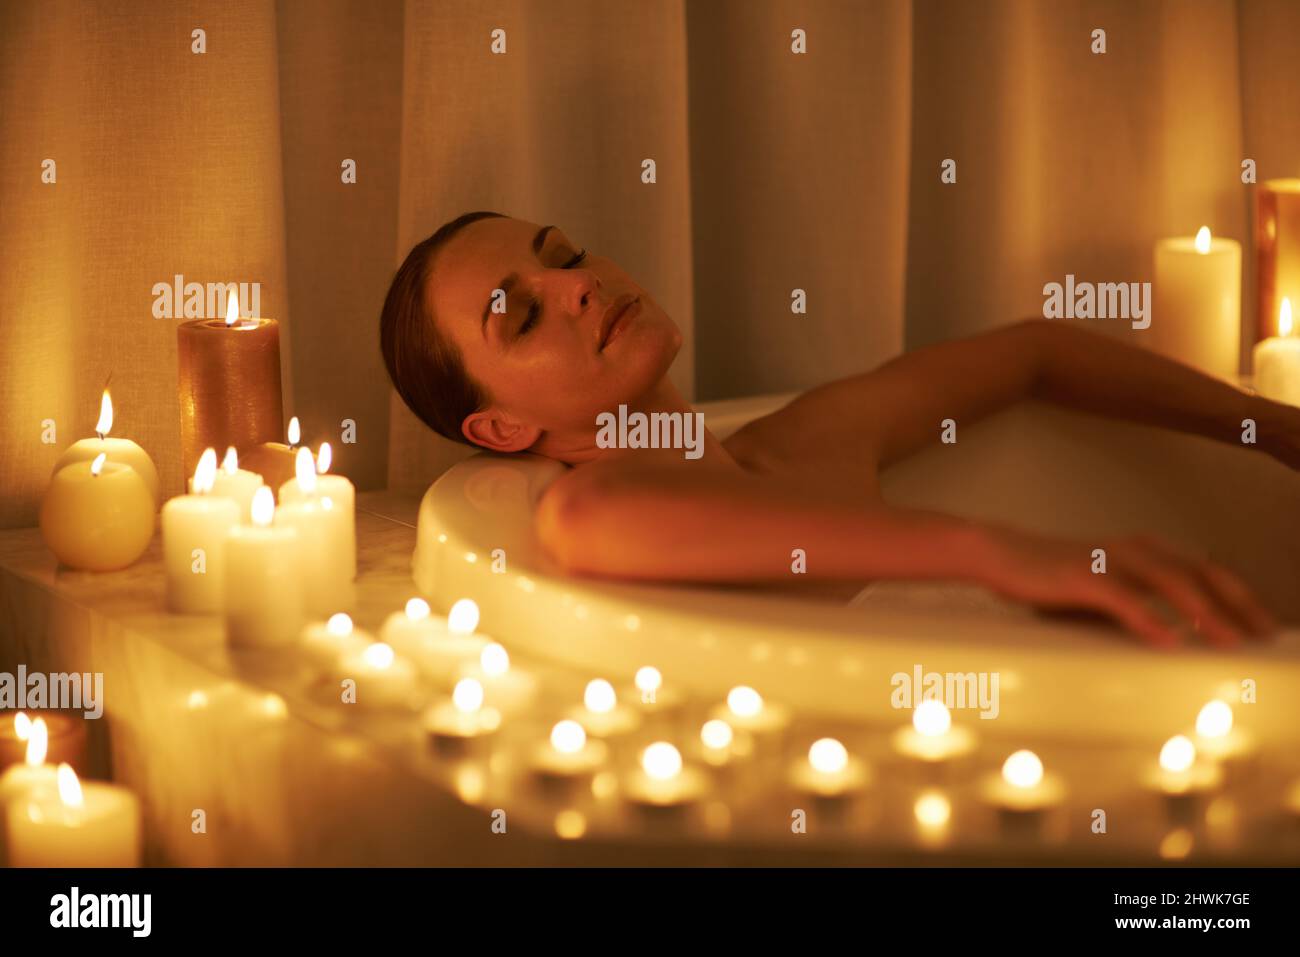 https://c8.alamy.com/comp/2HWK7GE/the-weeks-worries-washed-away-cropped-shot-of-a-gorgeous-woman-relaxing-in-a-candle-lit-bath-2HWK7GE.jpg